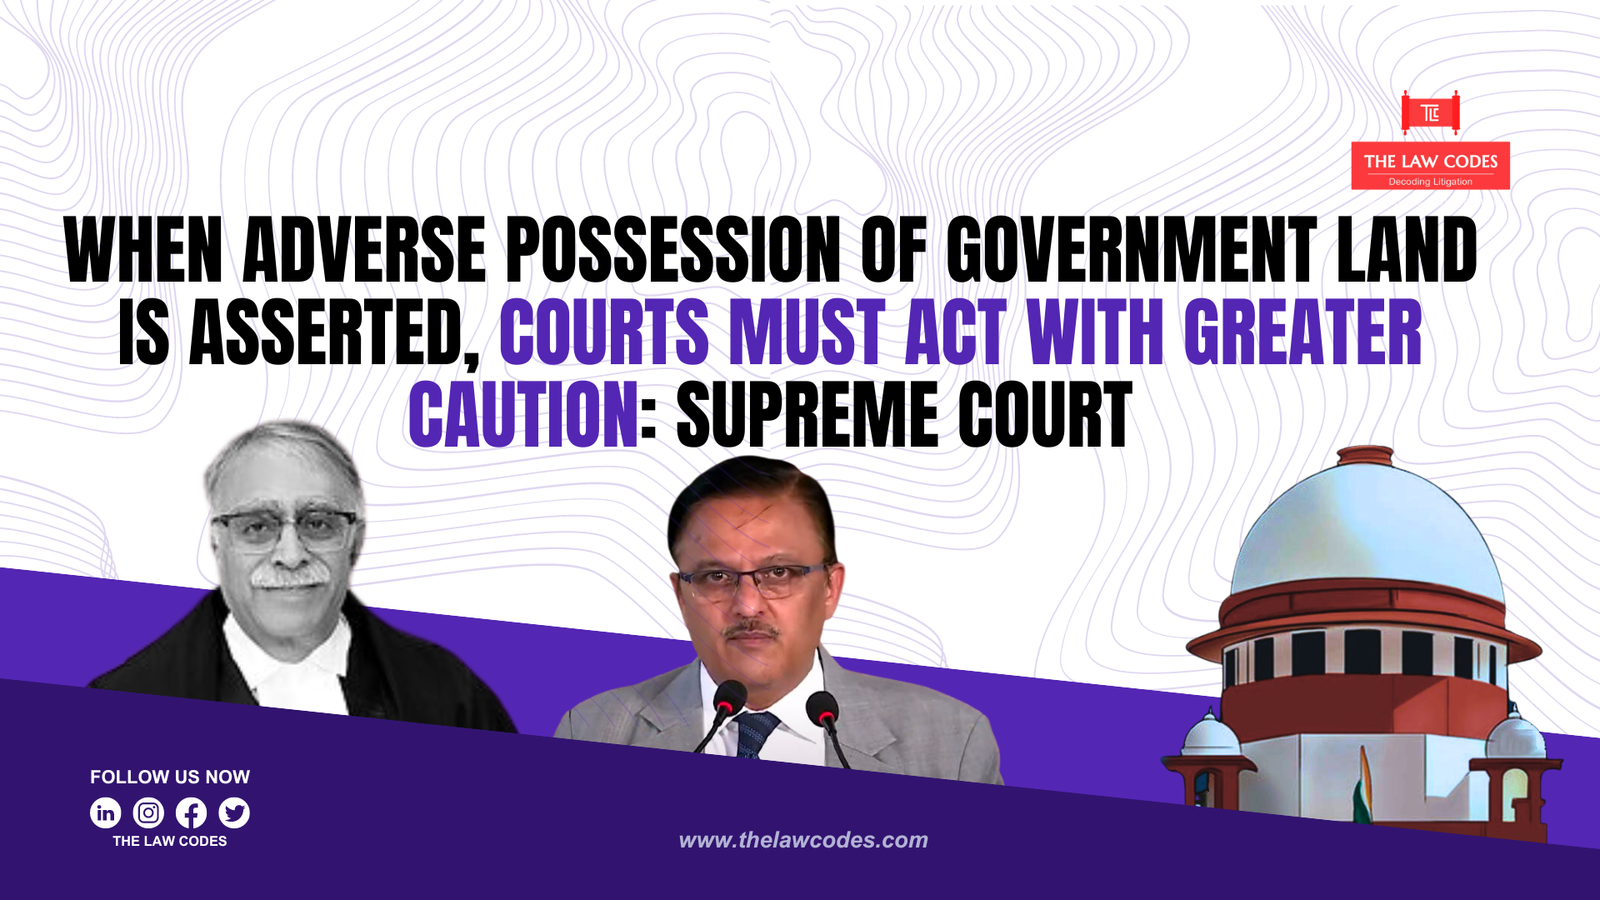 When adverse possession of government land is asserted, courts must act with greater caution Supreme Court